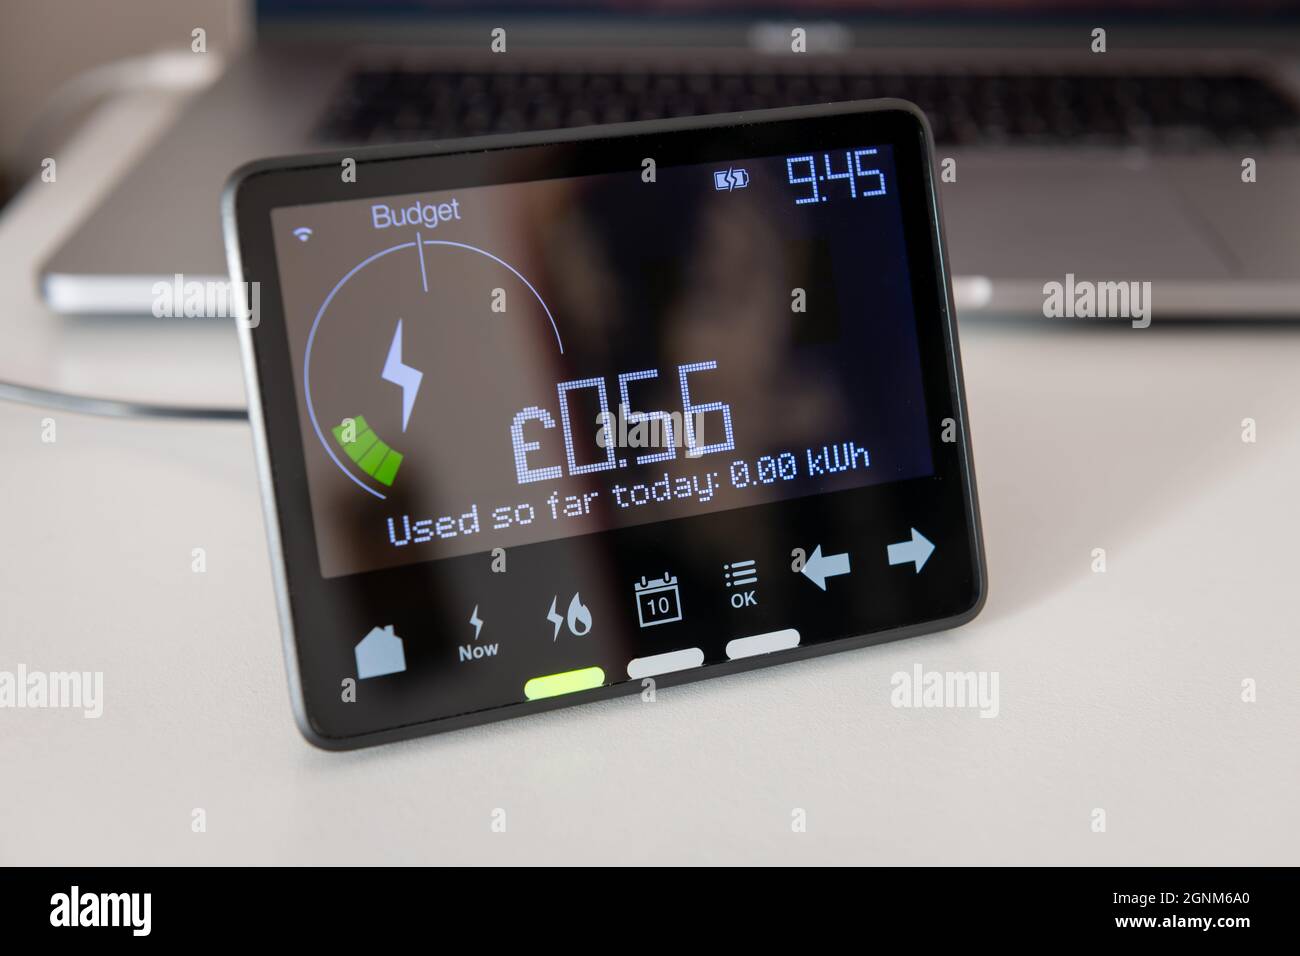 London. UK- 09.19.2021: the display of a smart electric meter with consumption information and cost per hour. Stock Photo